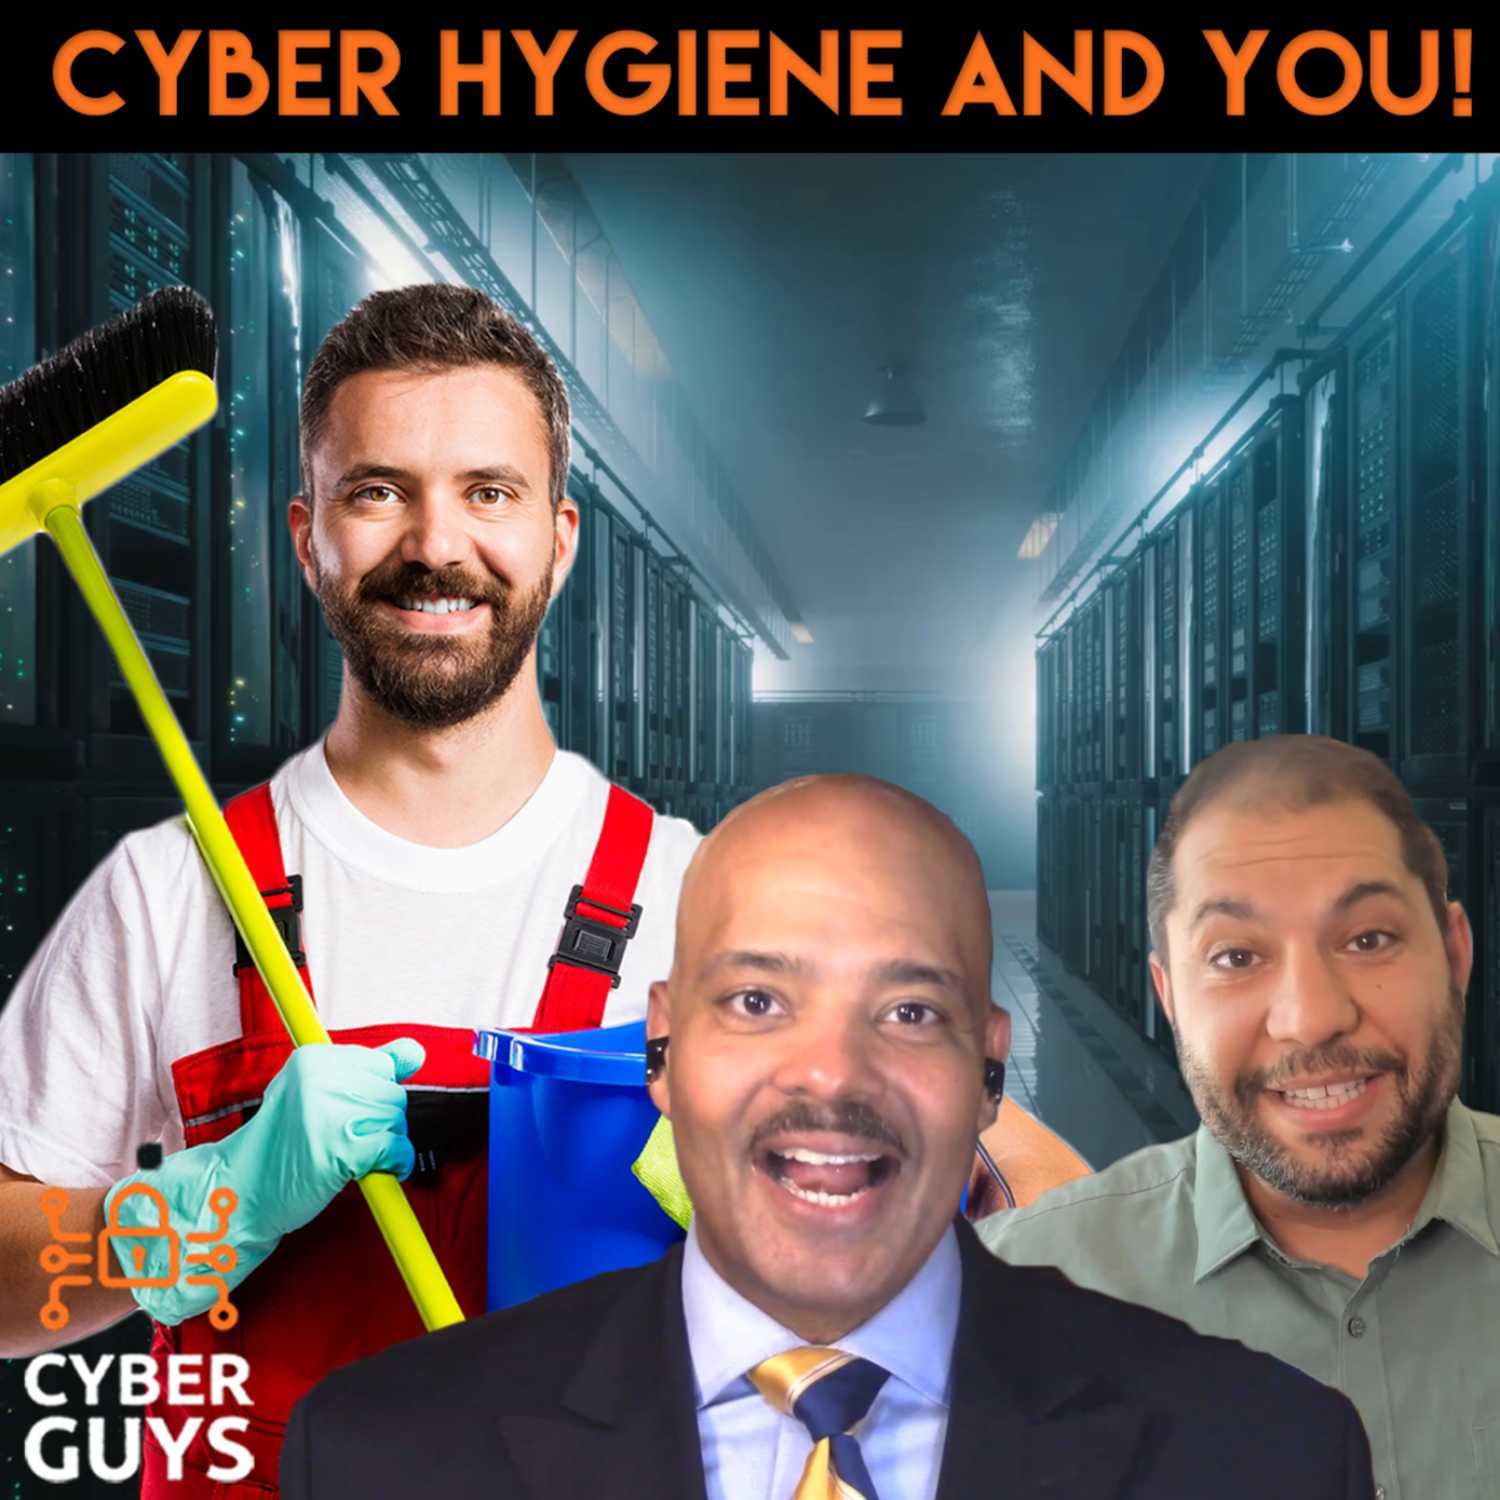 Cyber Hygiene and You!